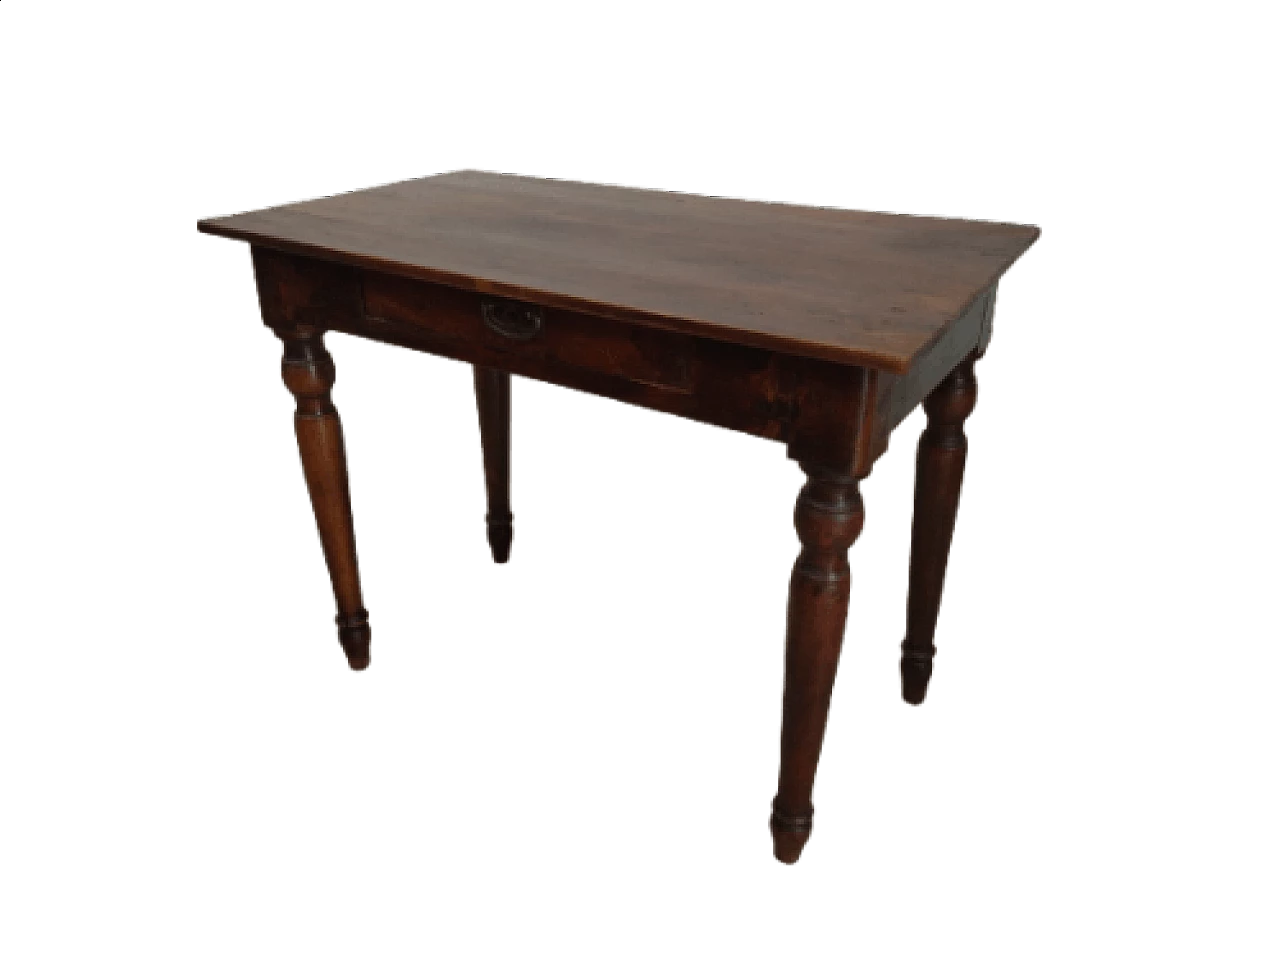 Louis Philippe table in walnut-stained poplar, 19th century 1